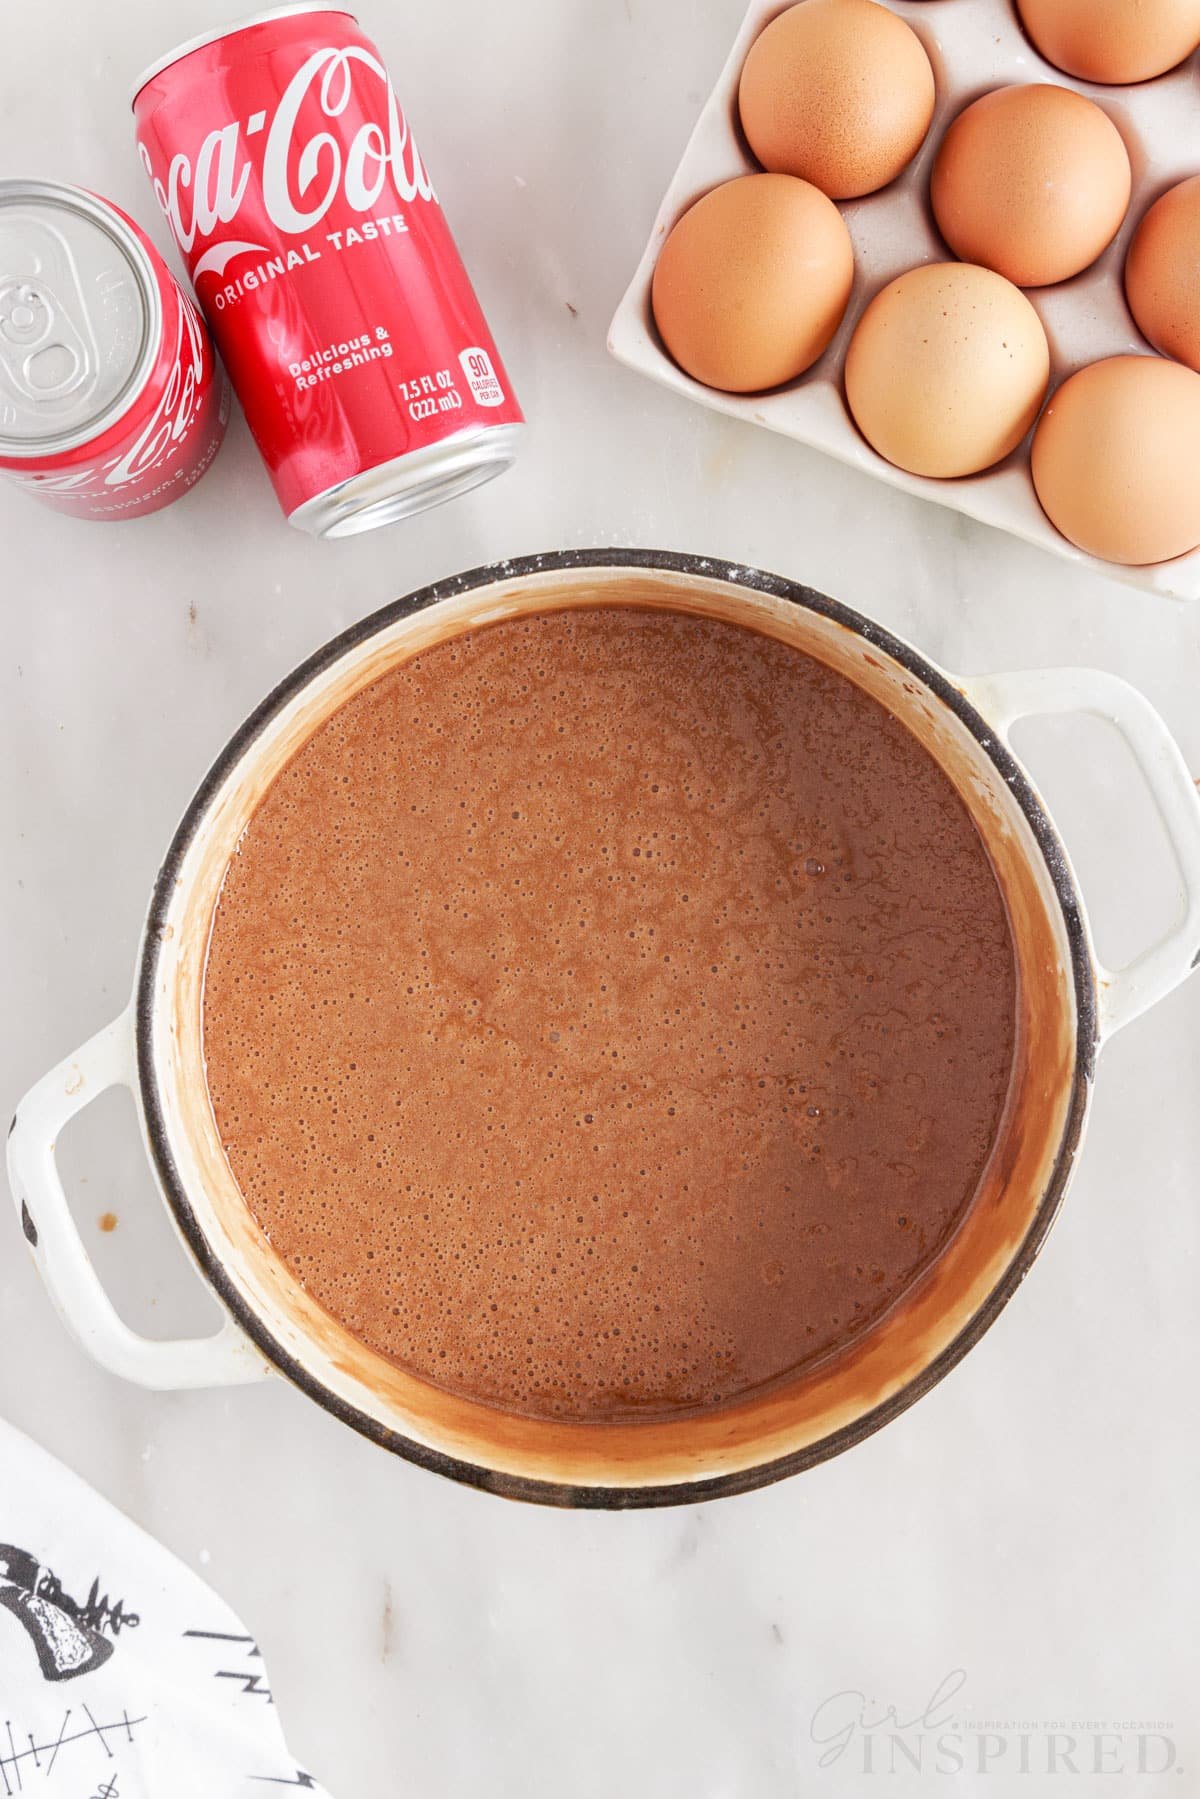 Coca Cola Cake batter in pan next to eggs and two Cokes.